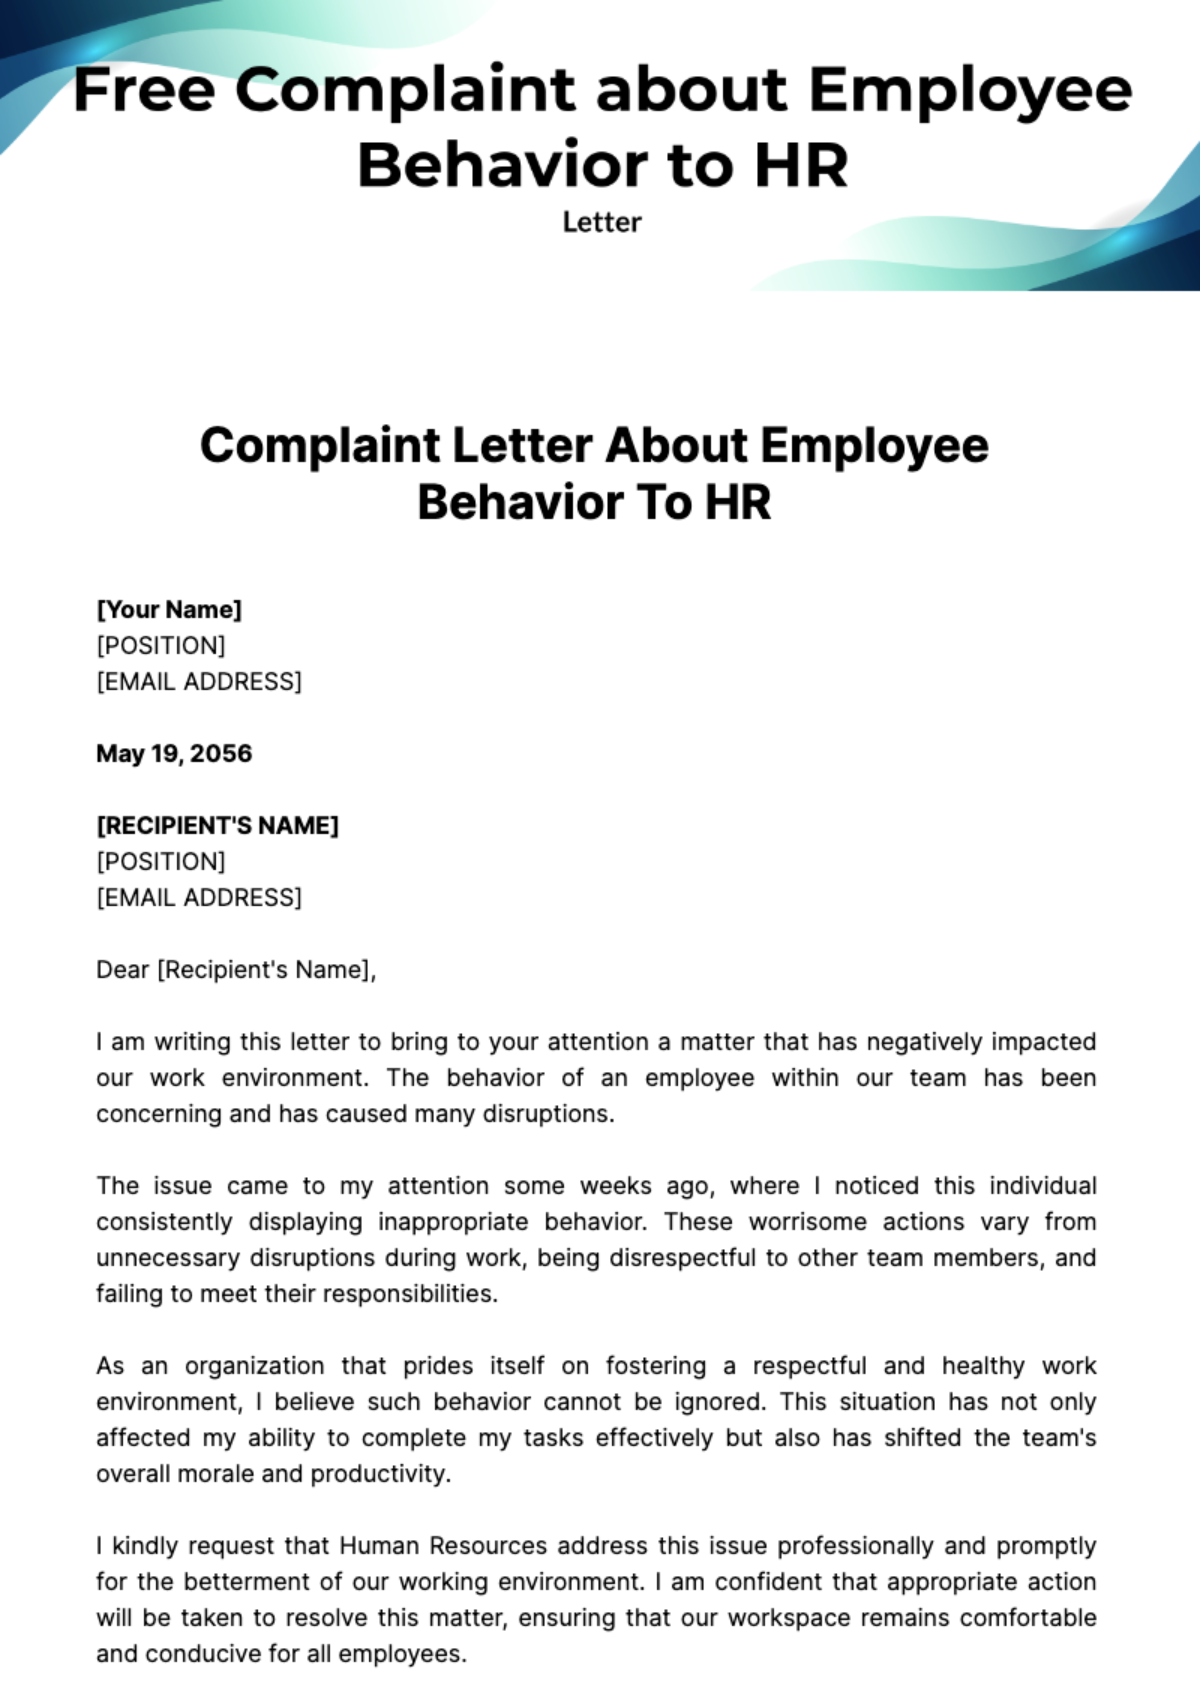 Free Complaint Letter about Employee Behavior to HR Template